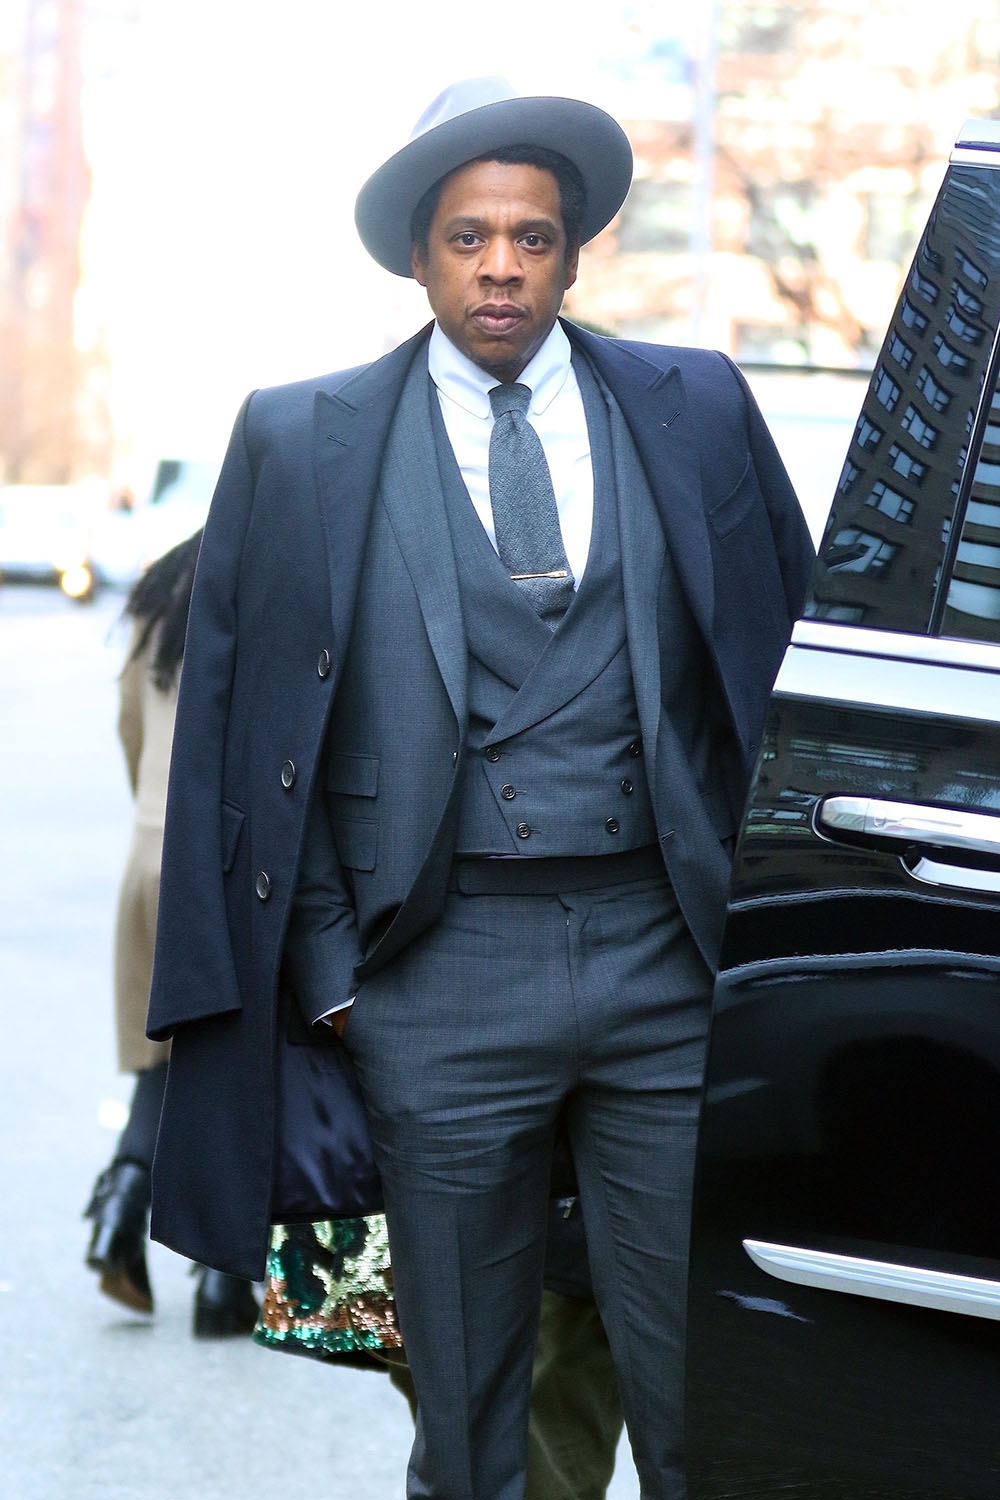 Jay Z is seen before the Roc Nation event